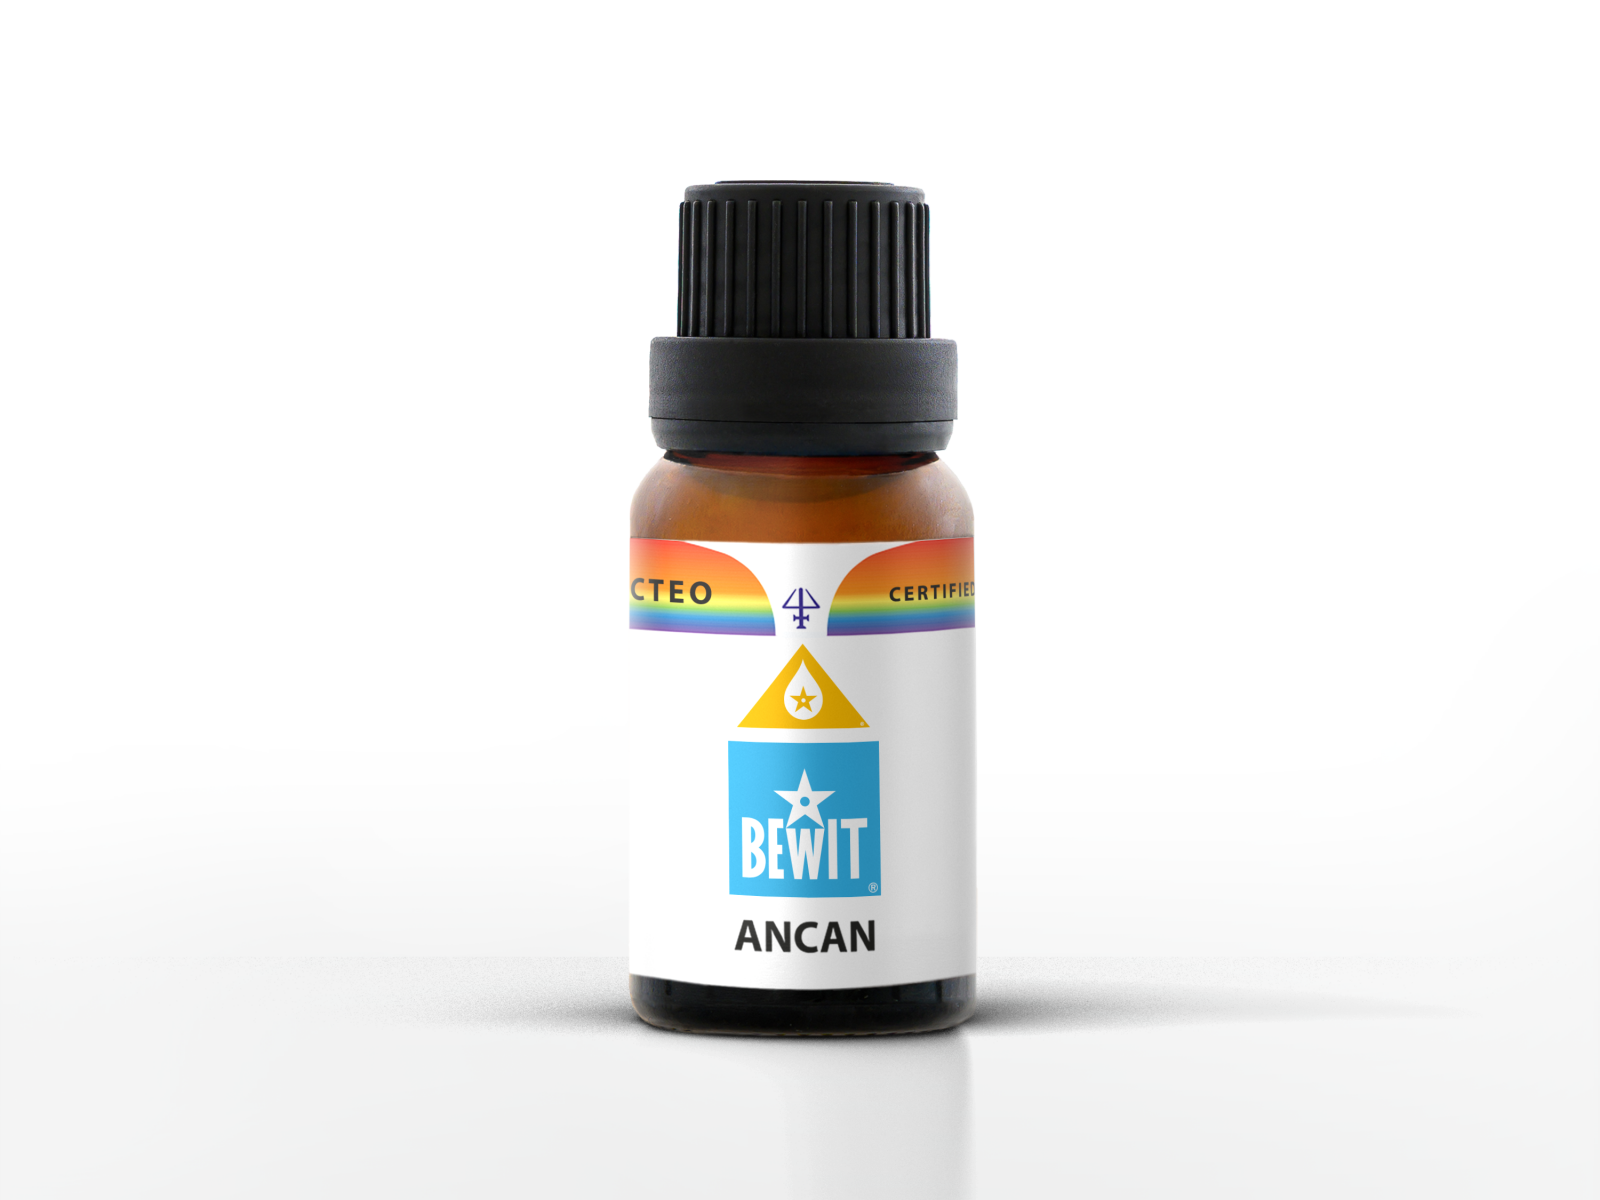 BEWIT Ancan - 100% natural essential oil blend in CTEO® quality